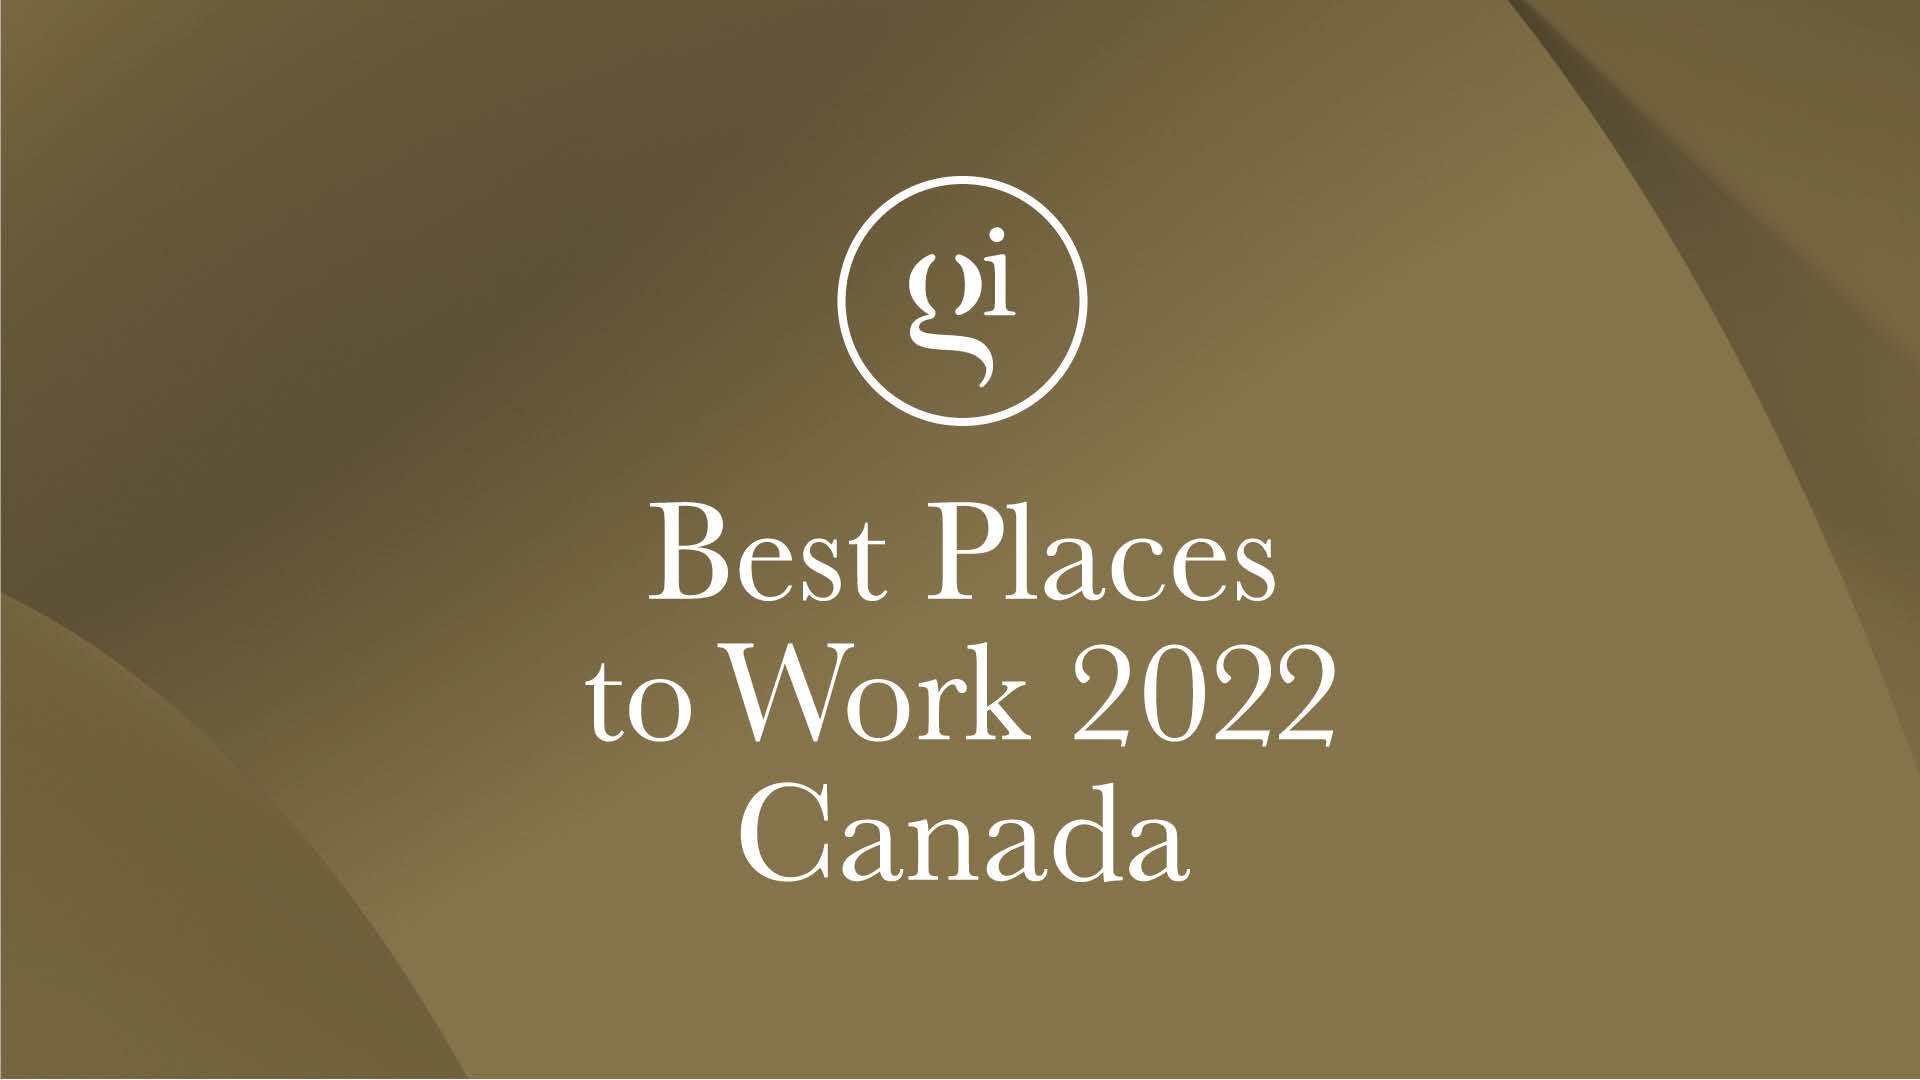 Image for Just one month left to enter Best Places To Work Awards Canada